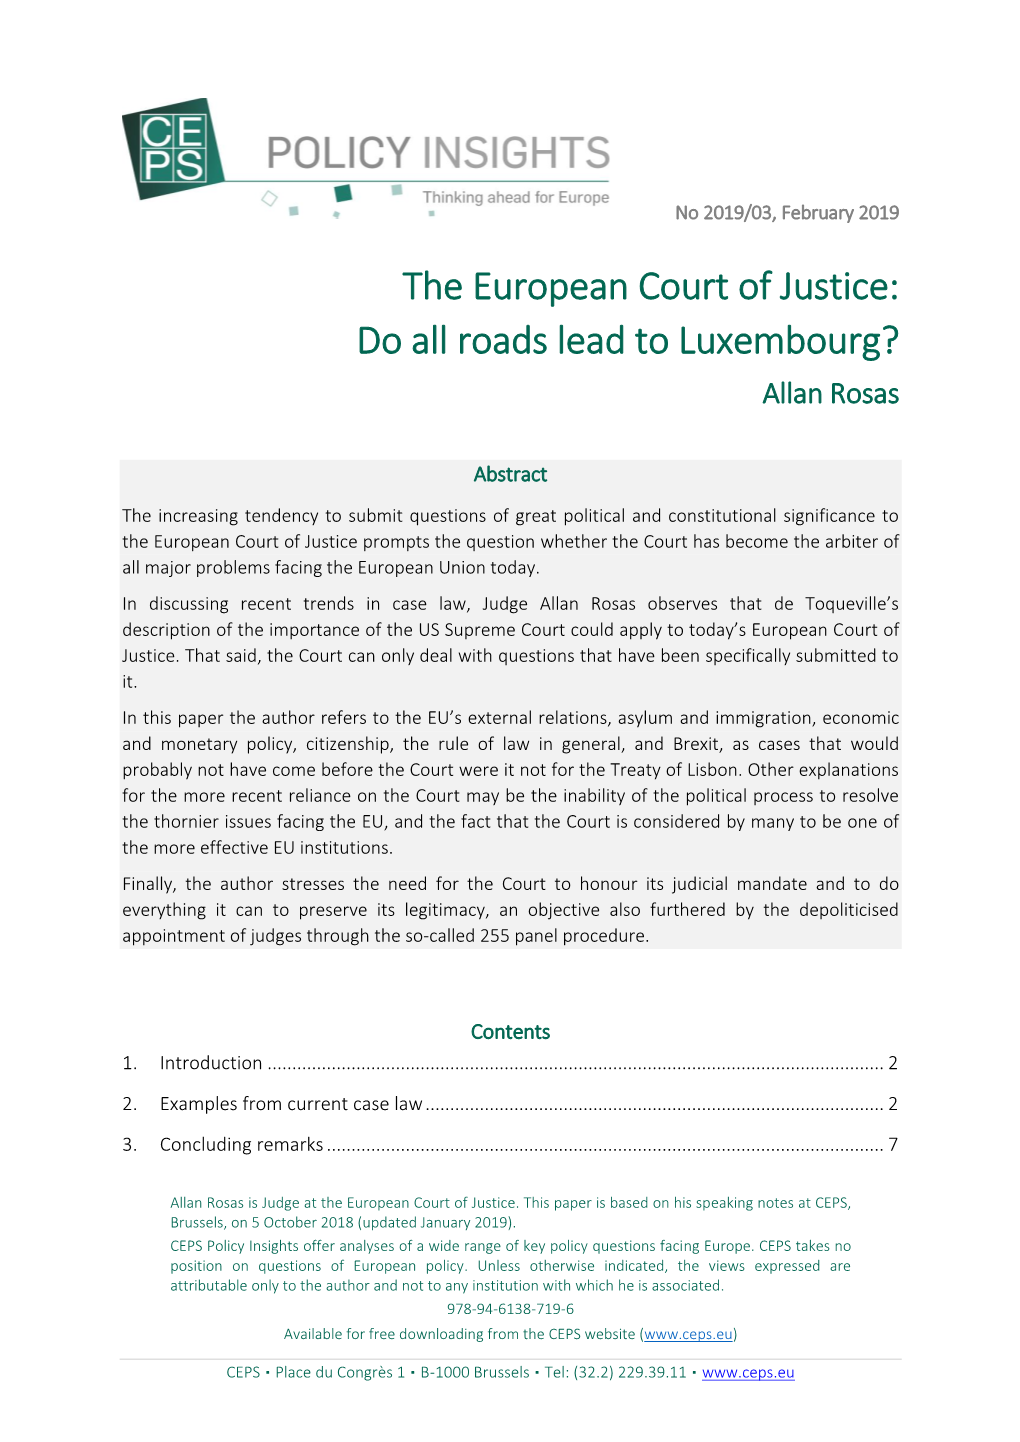 The European Court of Justice: Do All Roads Lead to Luxembourg? Allan Rosas